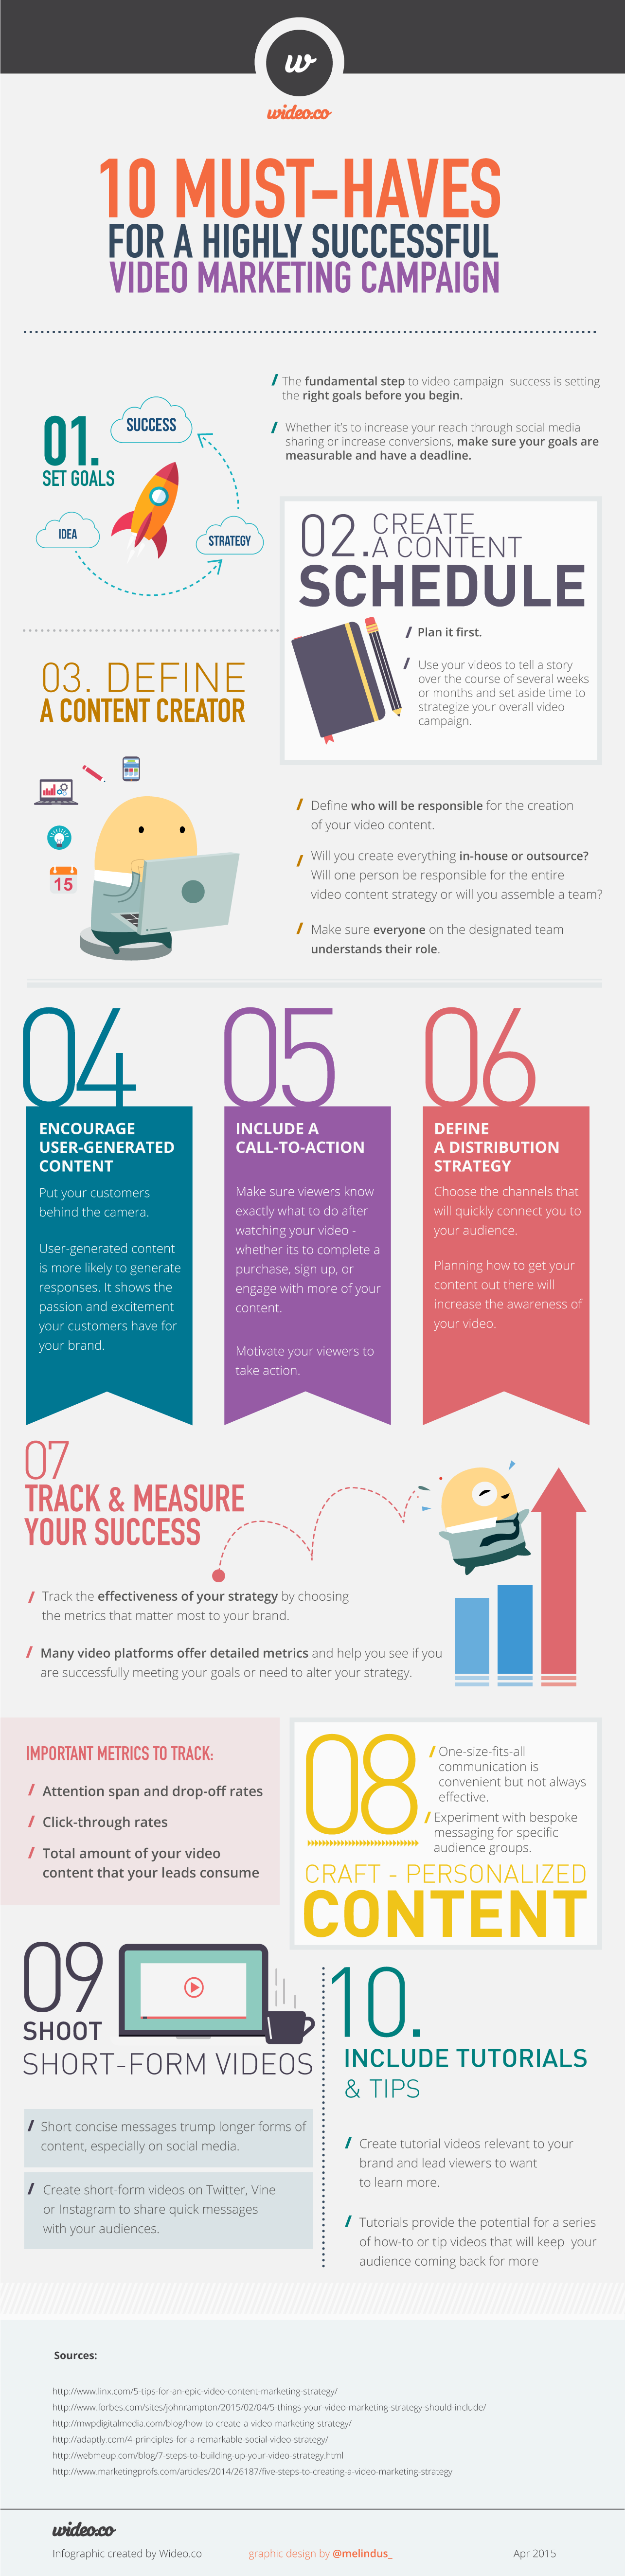 10 Must Haves for a Highly Successful Video Marketing Campaign [Infographic]